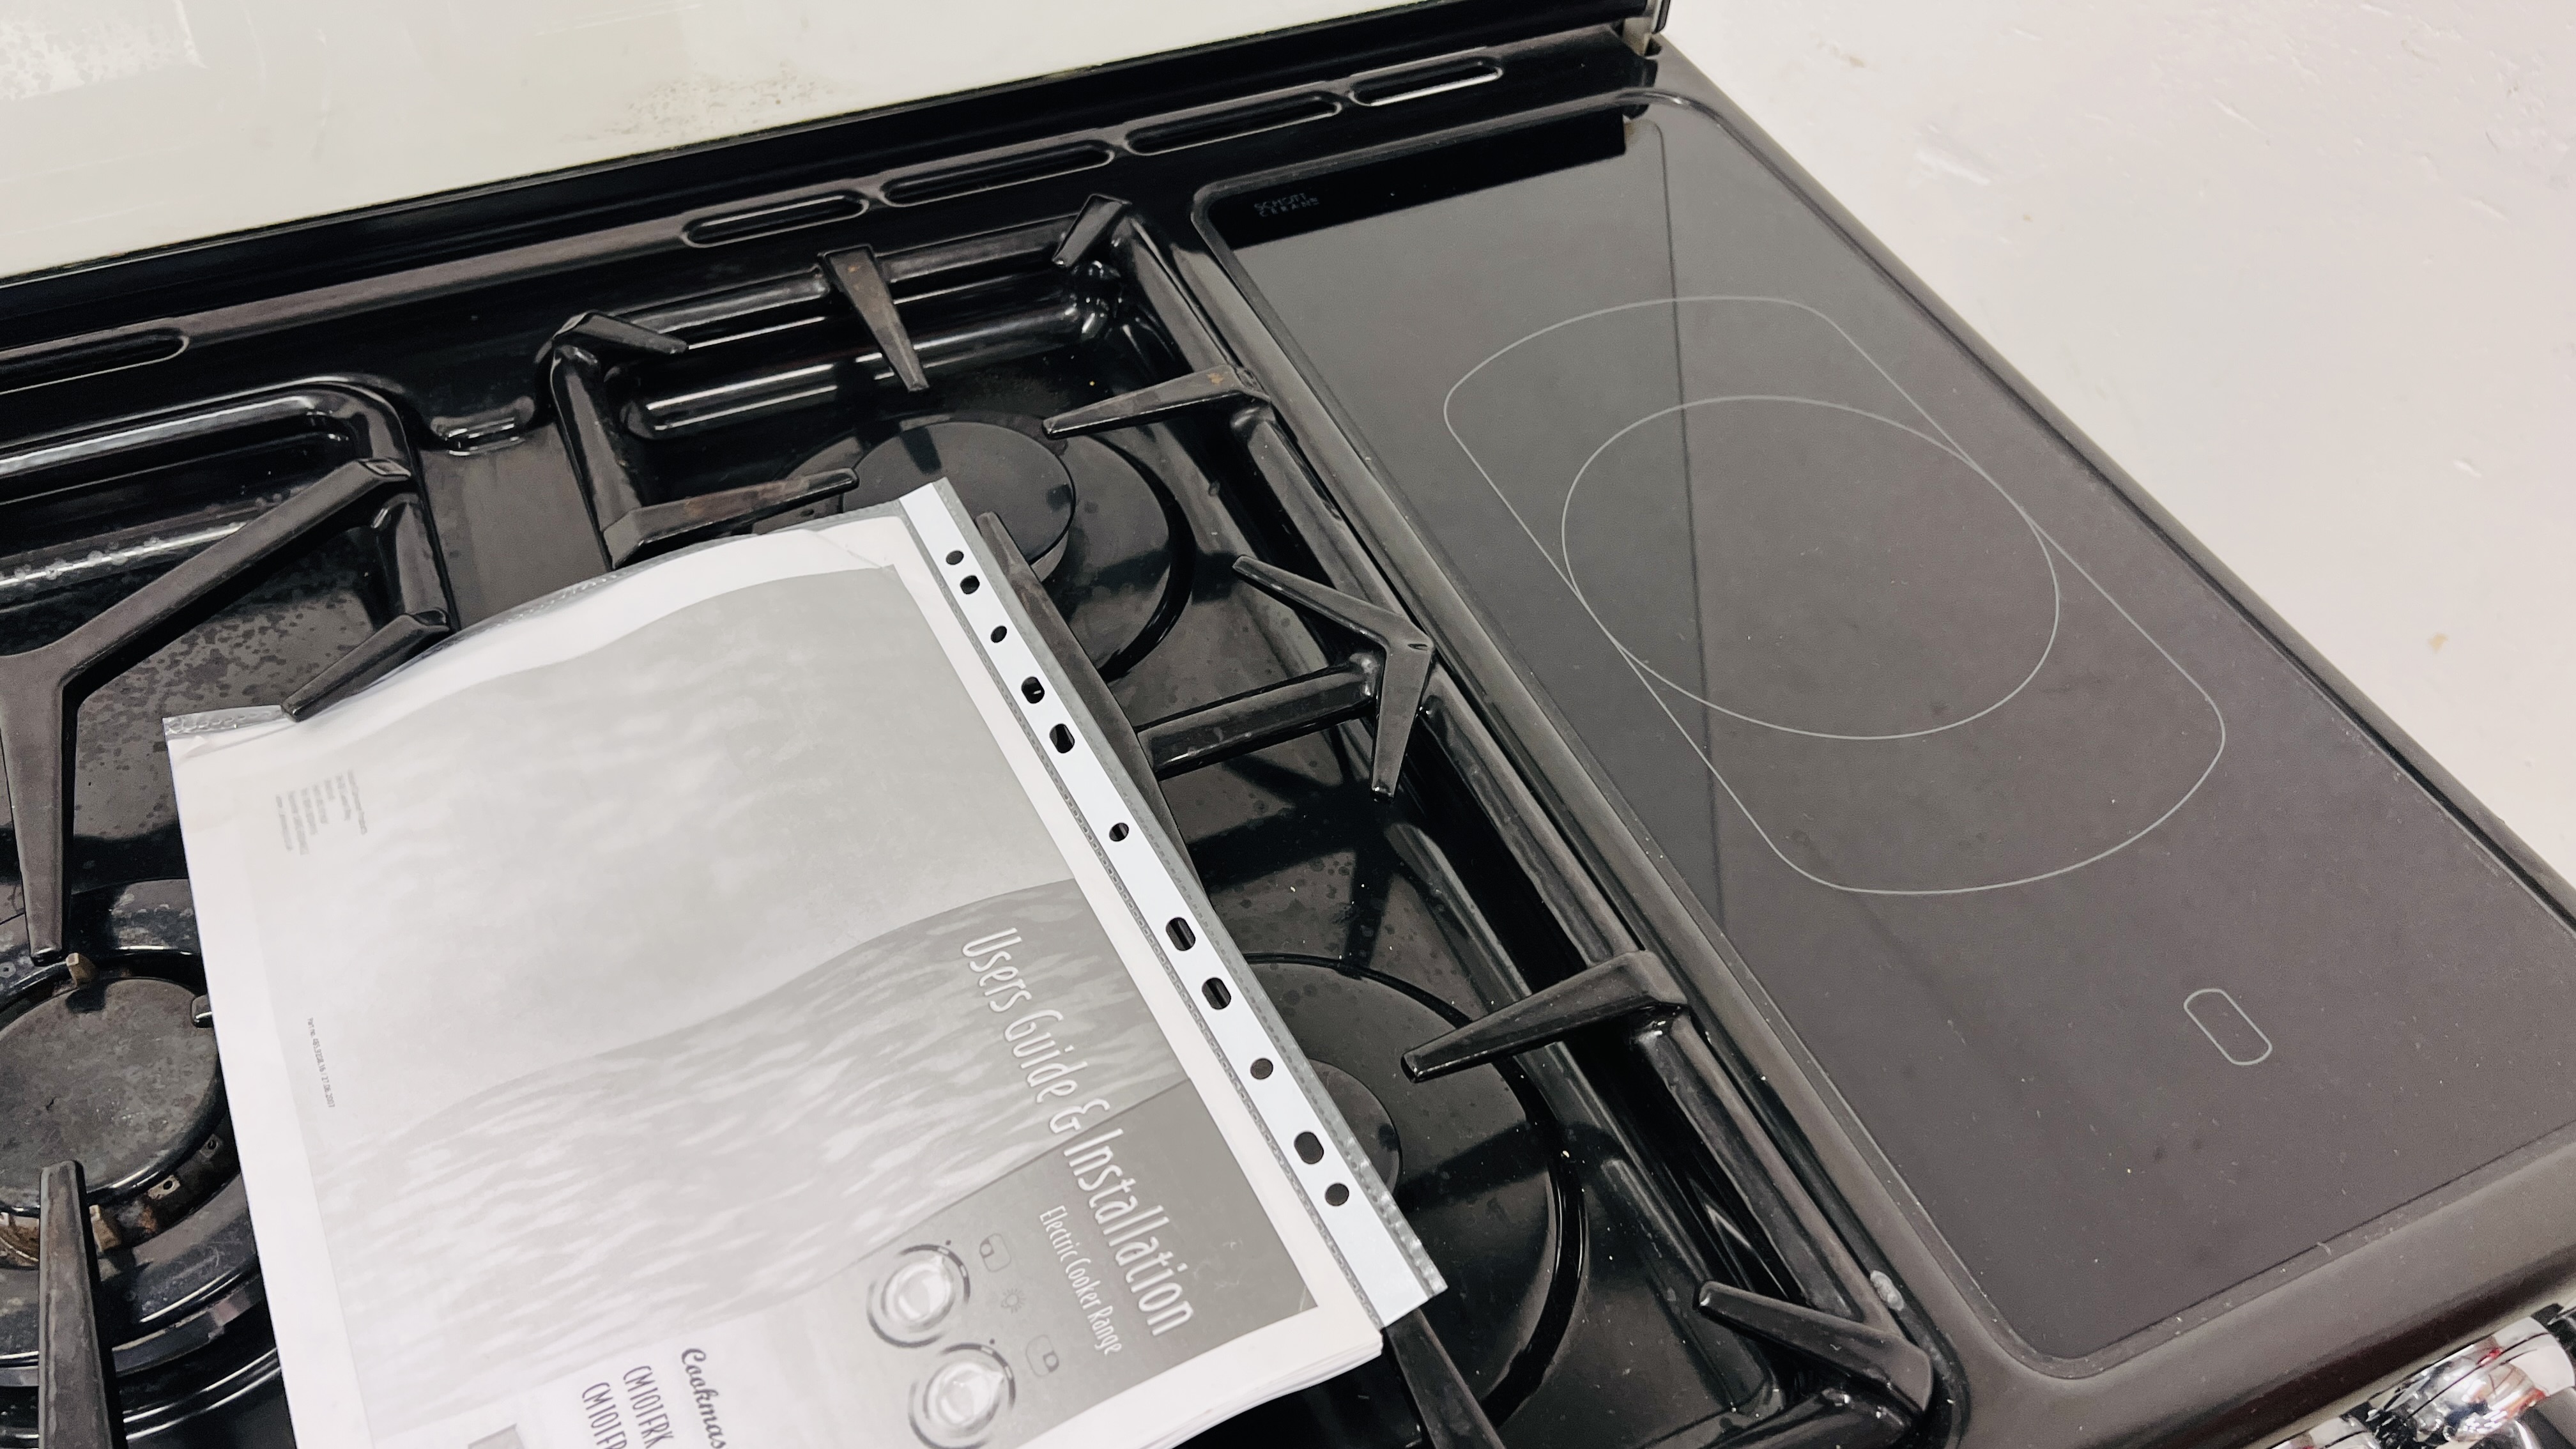 LEISURE COOKMASTER 101 ELECTRIC COOKER RANGE WITH GAS HOB (WITH USER GUIDE) WIDTH 100CM. - Image 4 of 28